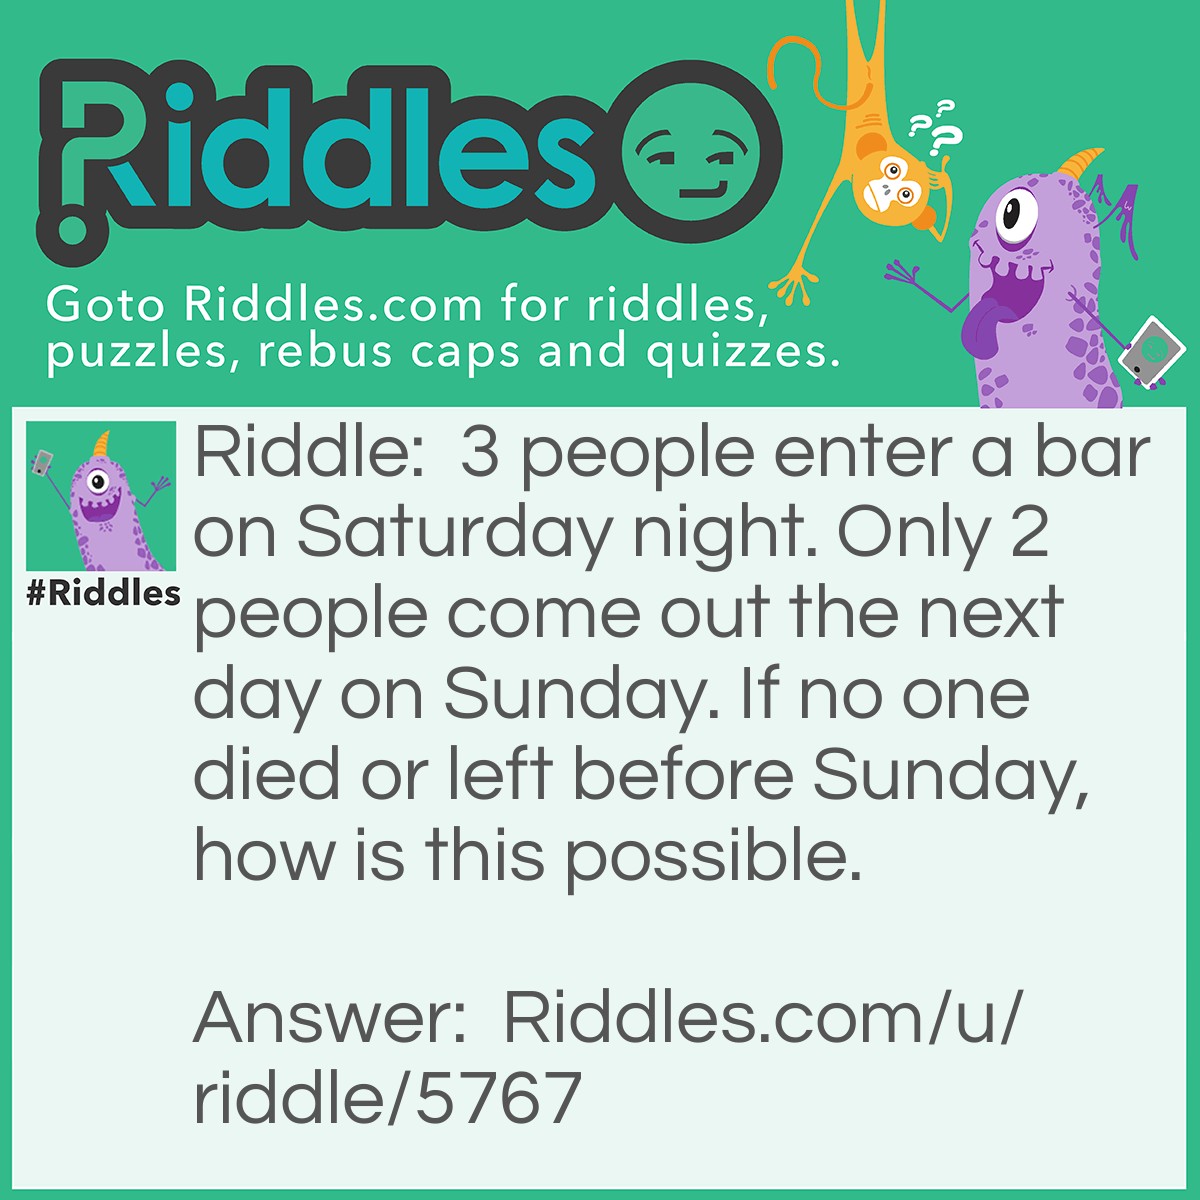 Riddle: 3 people enter a bar on Saturday night. Only 2 people come out the next day on Sunday. If no one died or left before Sunday, how is this possible. Answer: 1 person is still in the bar.